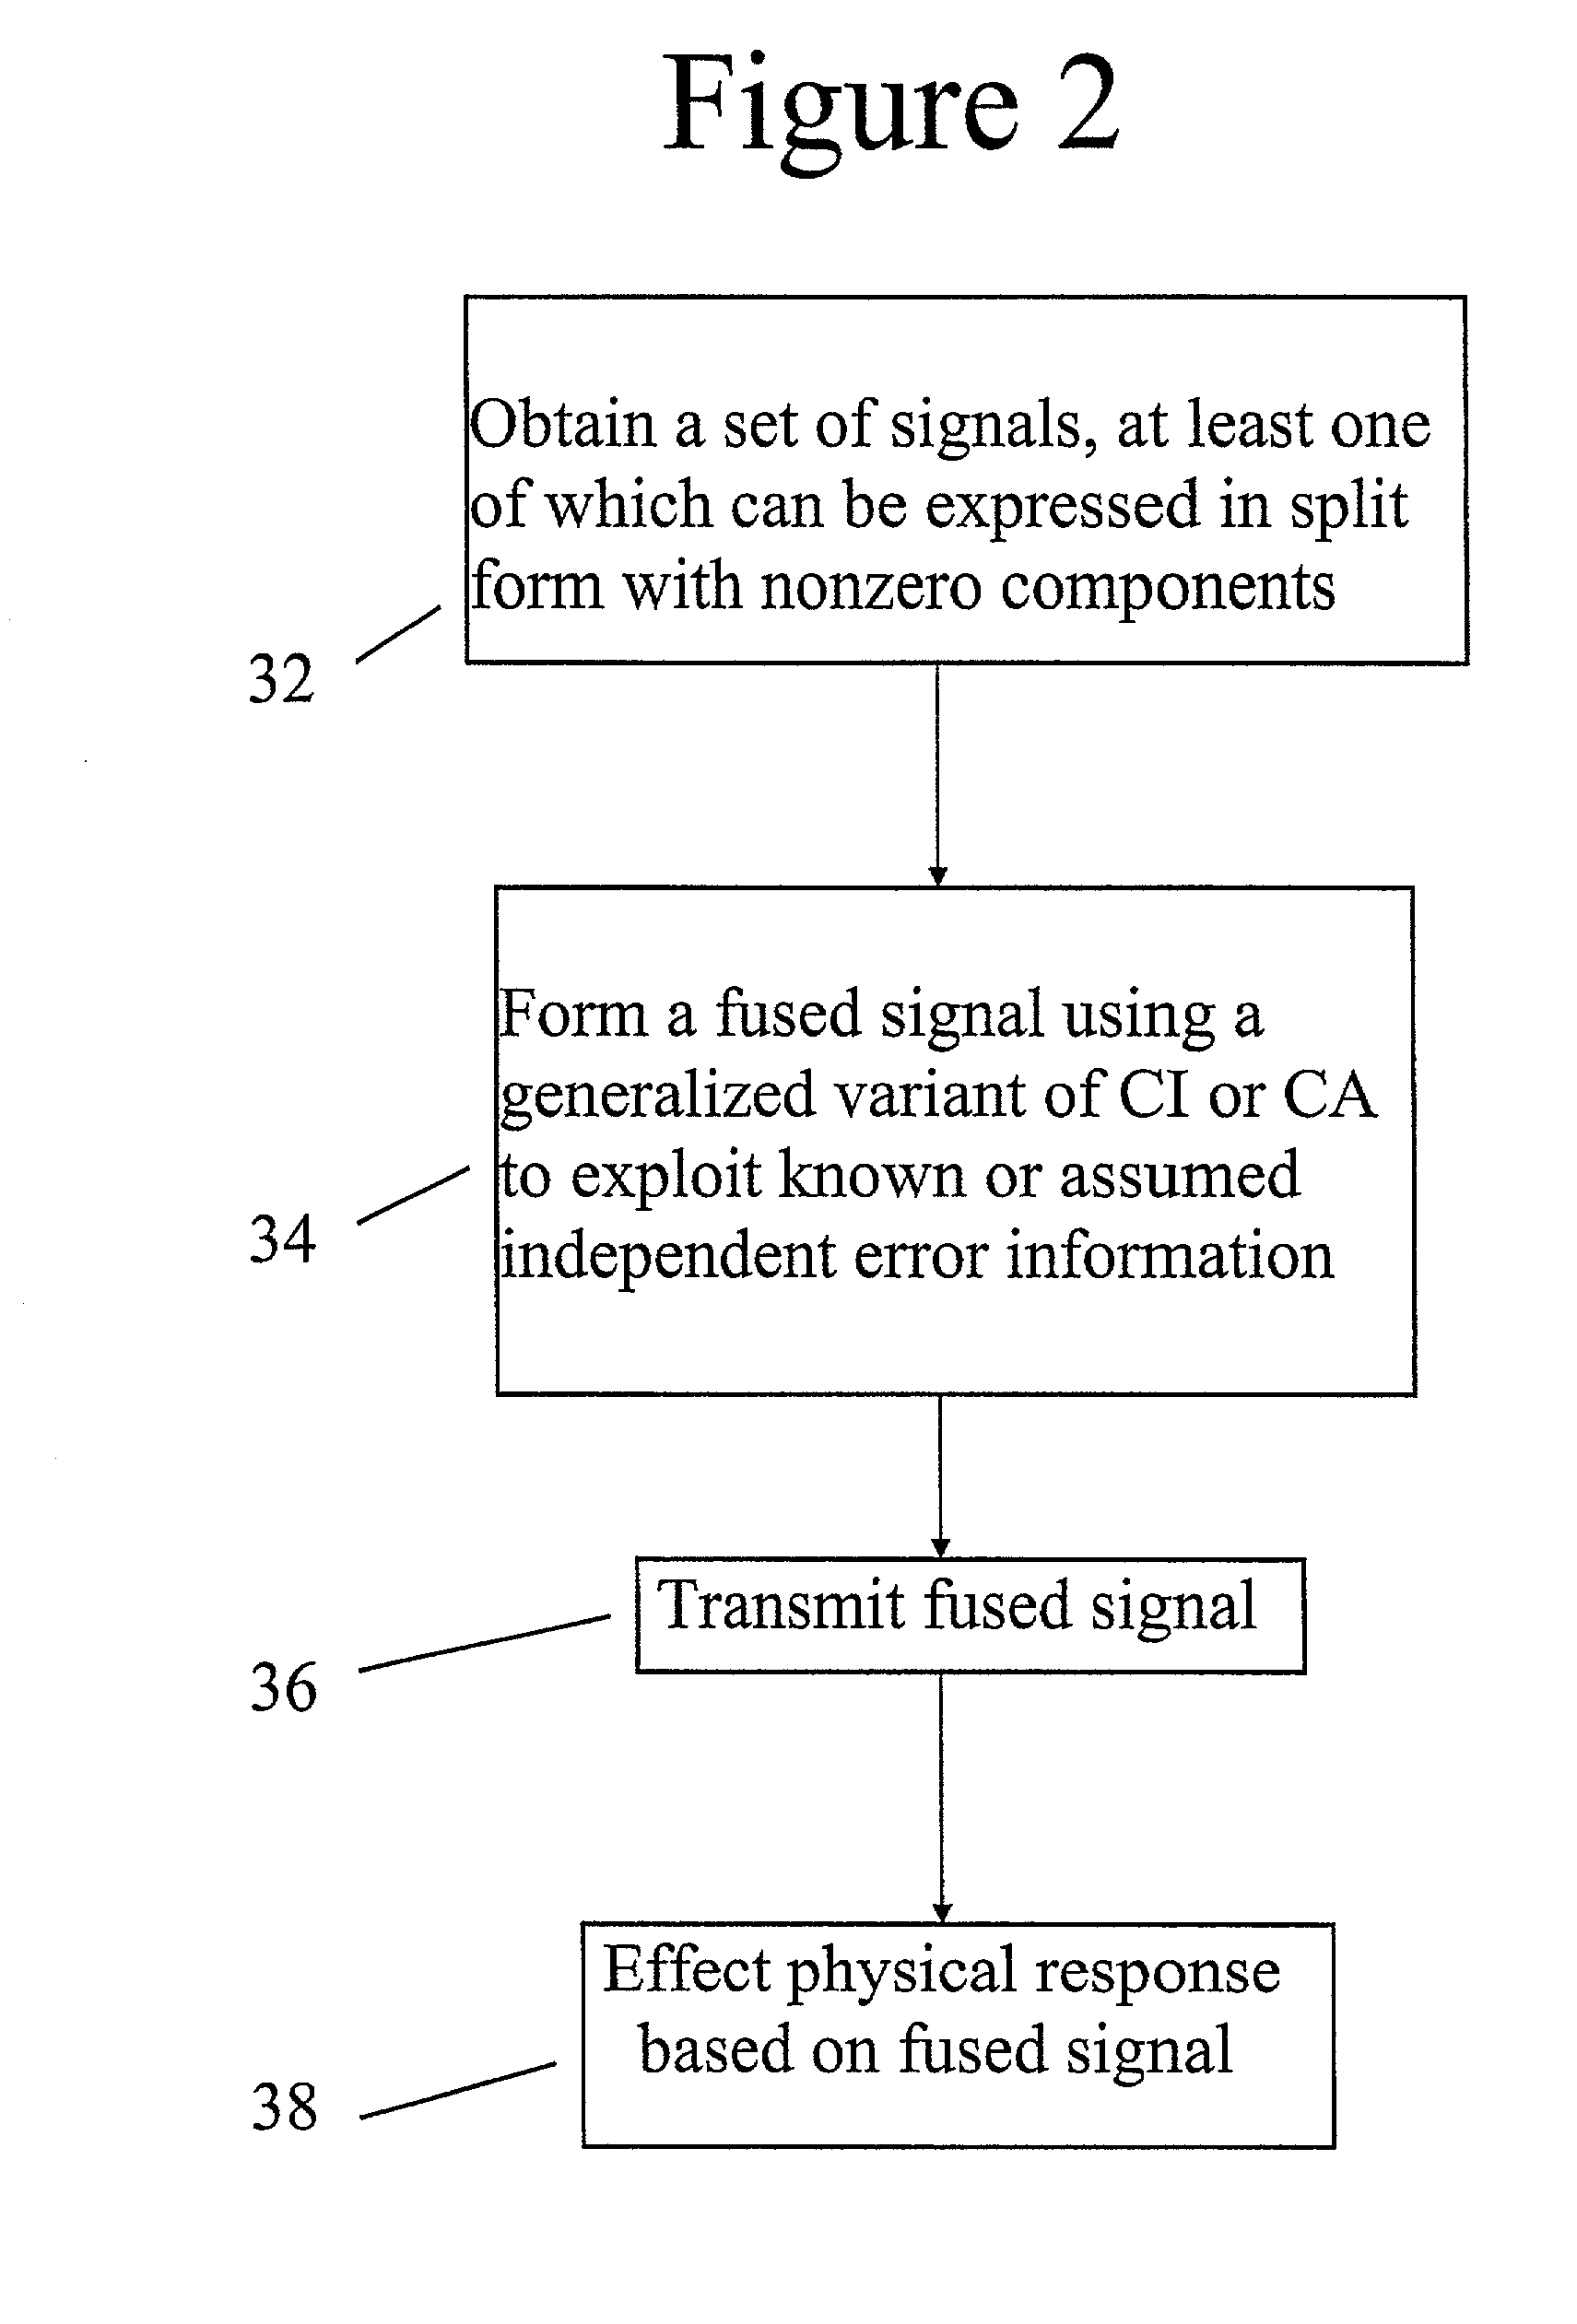 Method and apparatus for fusing signals with partially known independent error components